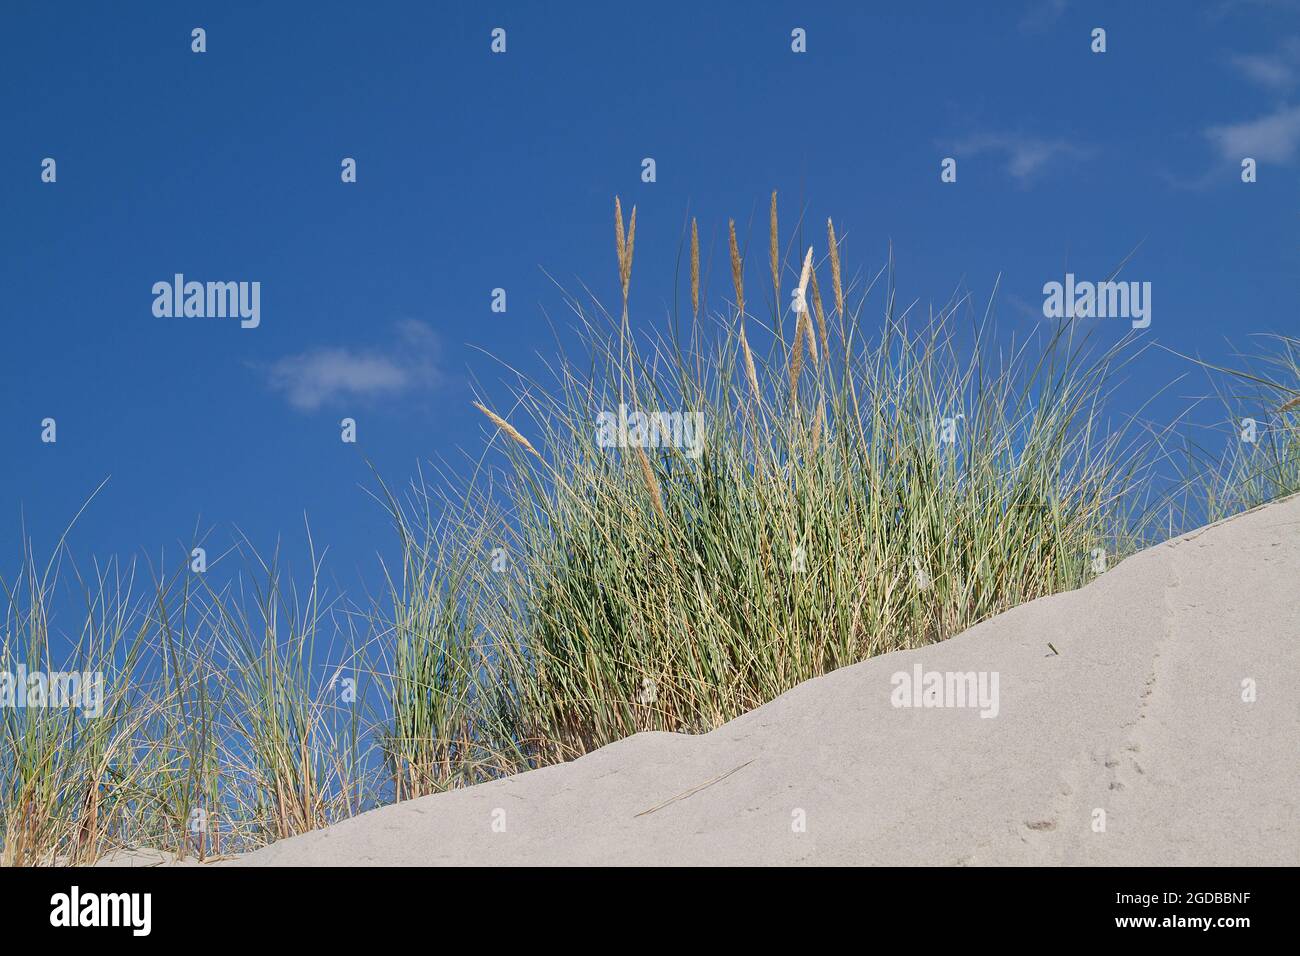 Marram grass on dune under blue sky seen from low point of view Stock Photo